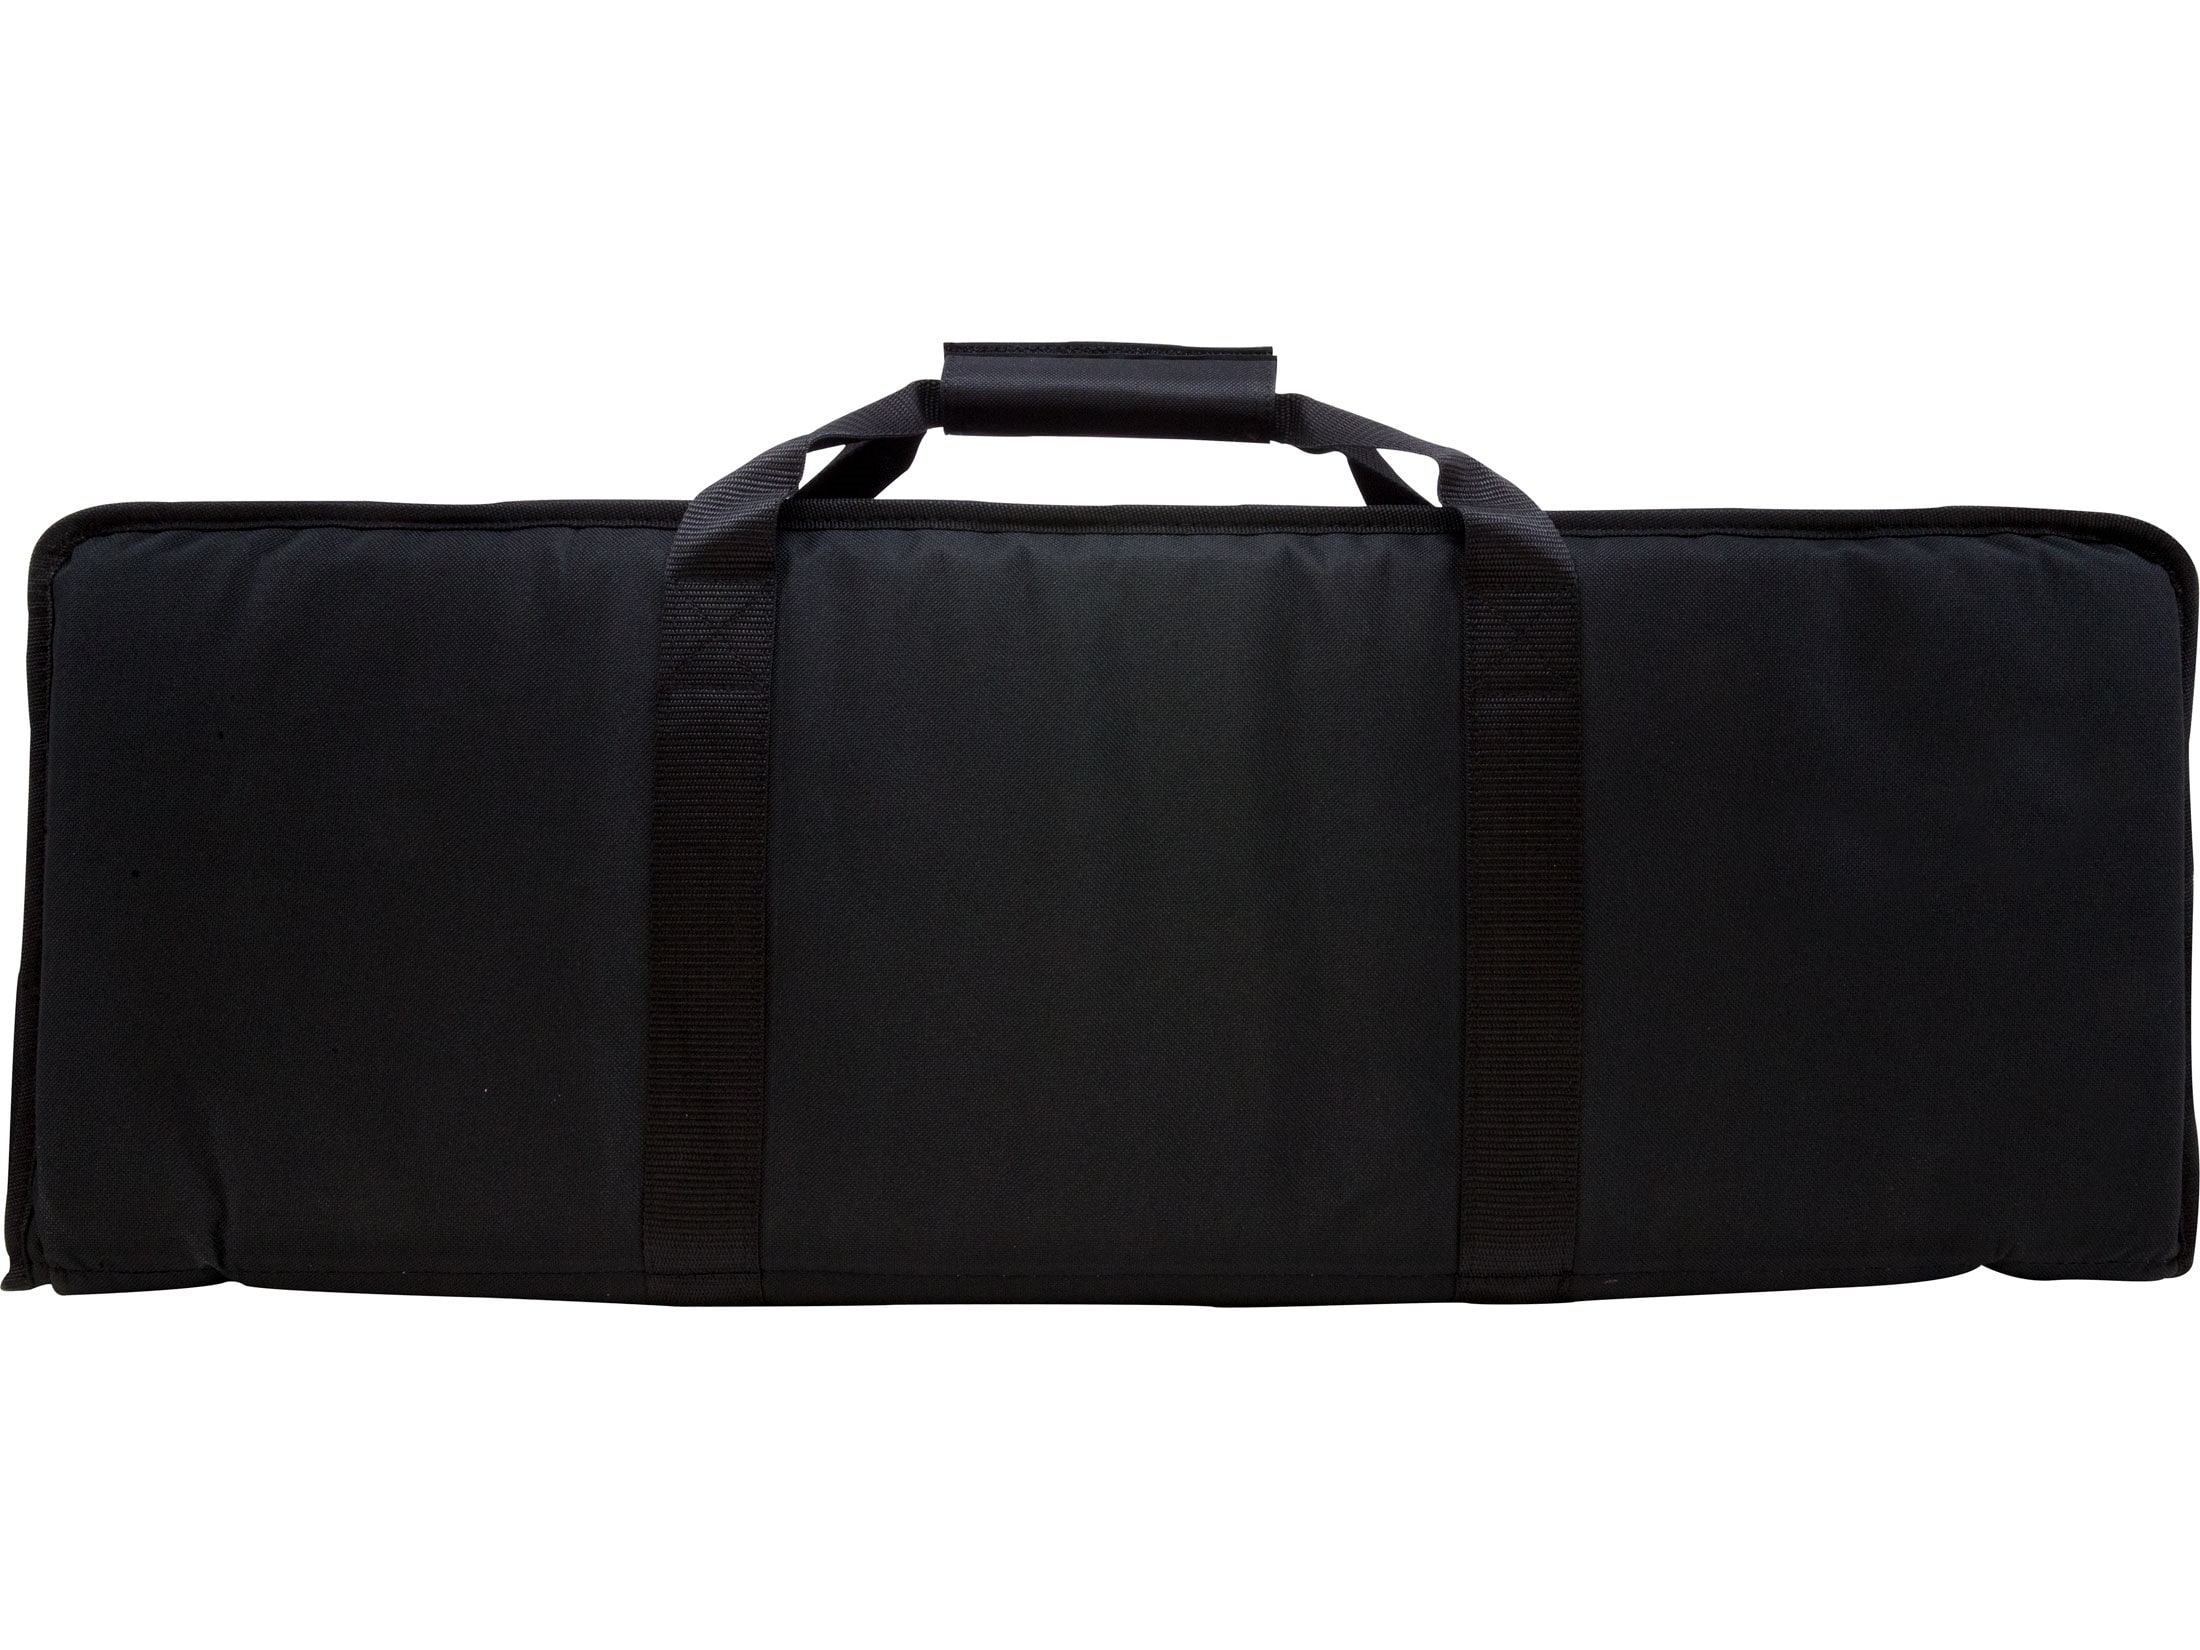 5.11 39" Tactical Rifle Range Gun Carry Case Double Padded